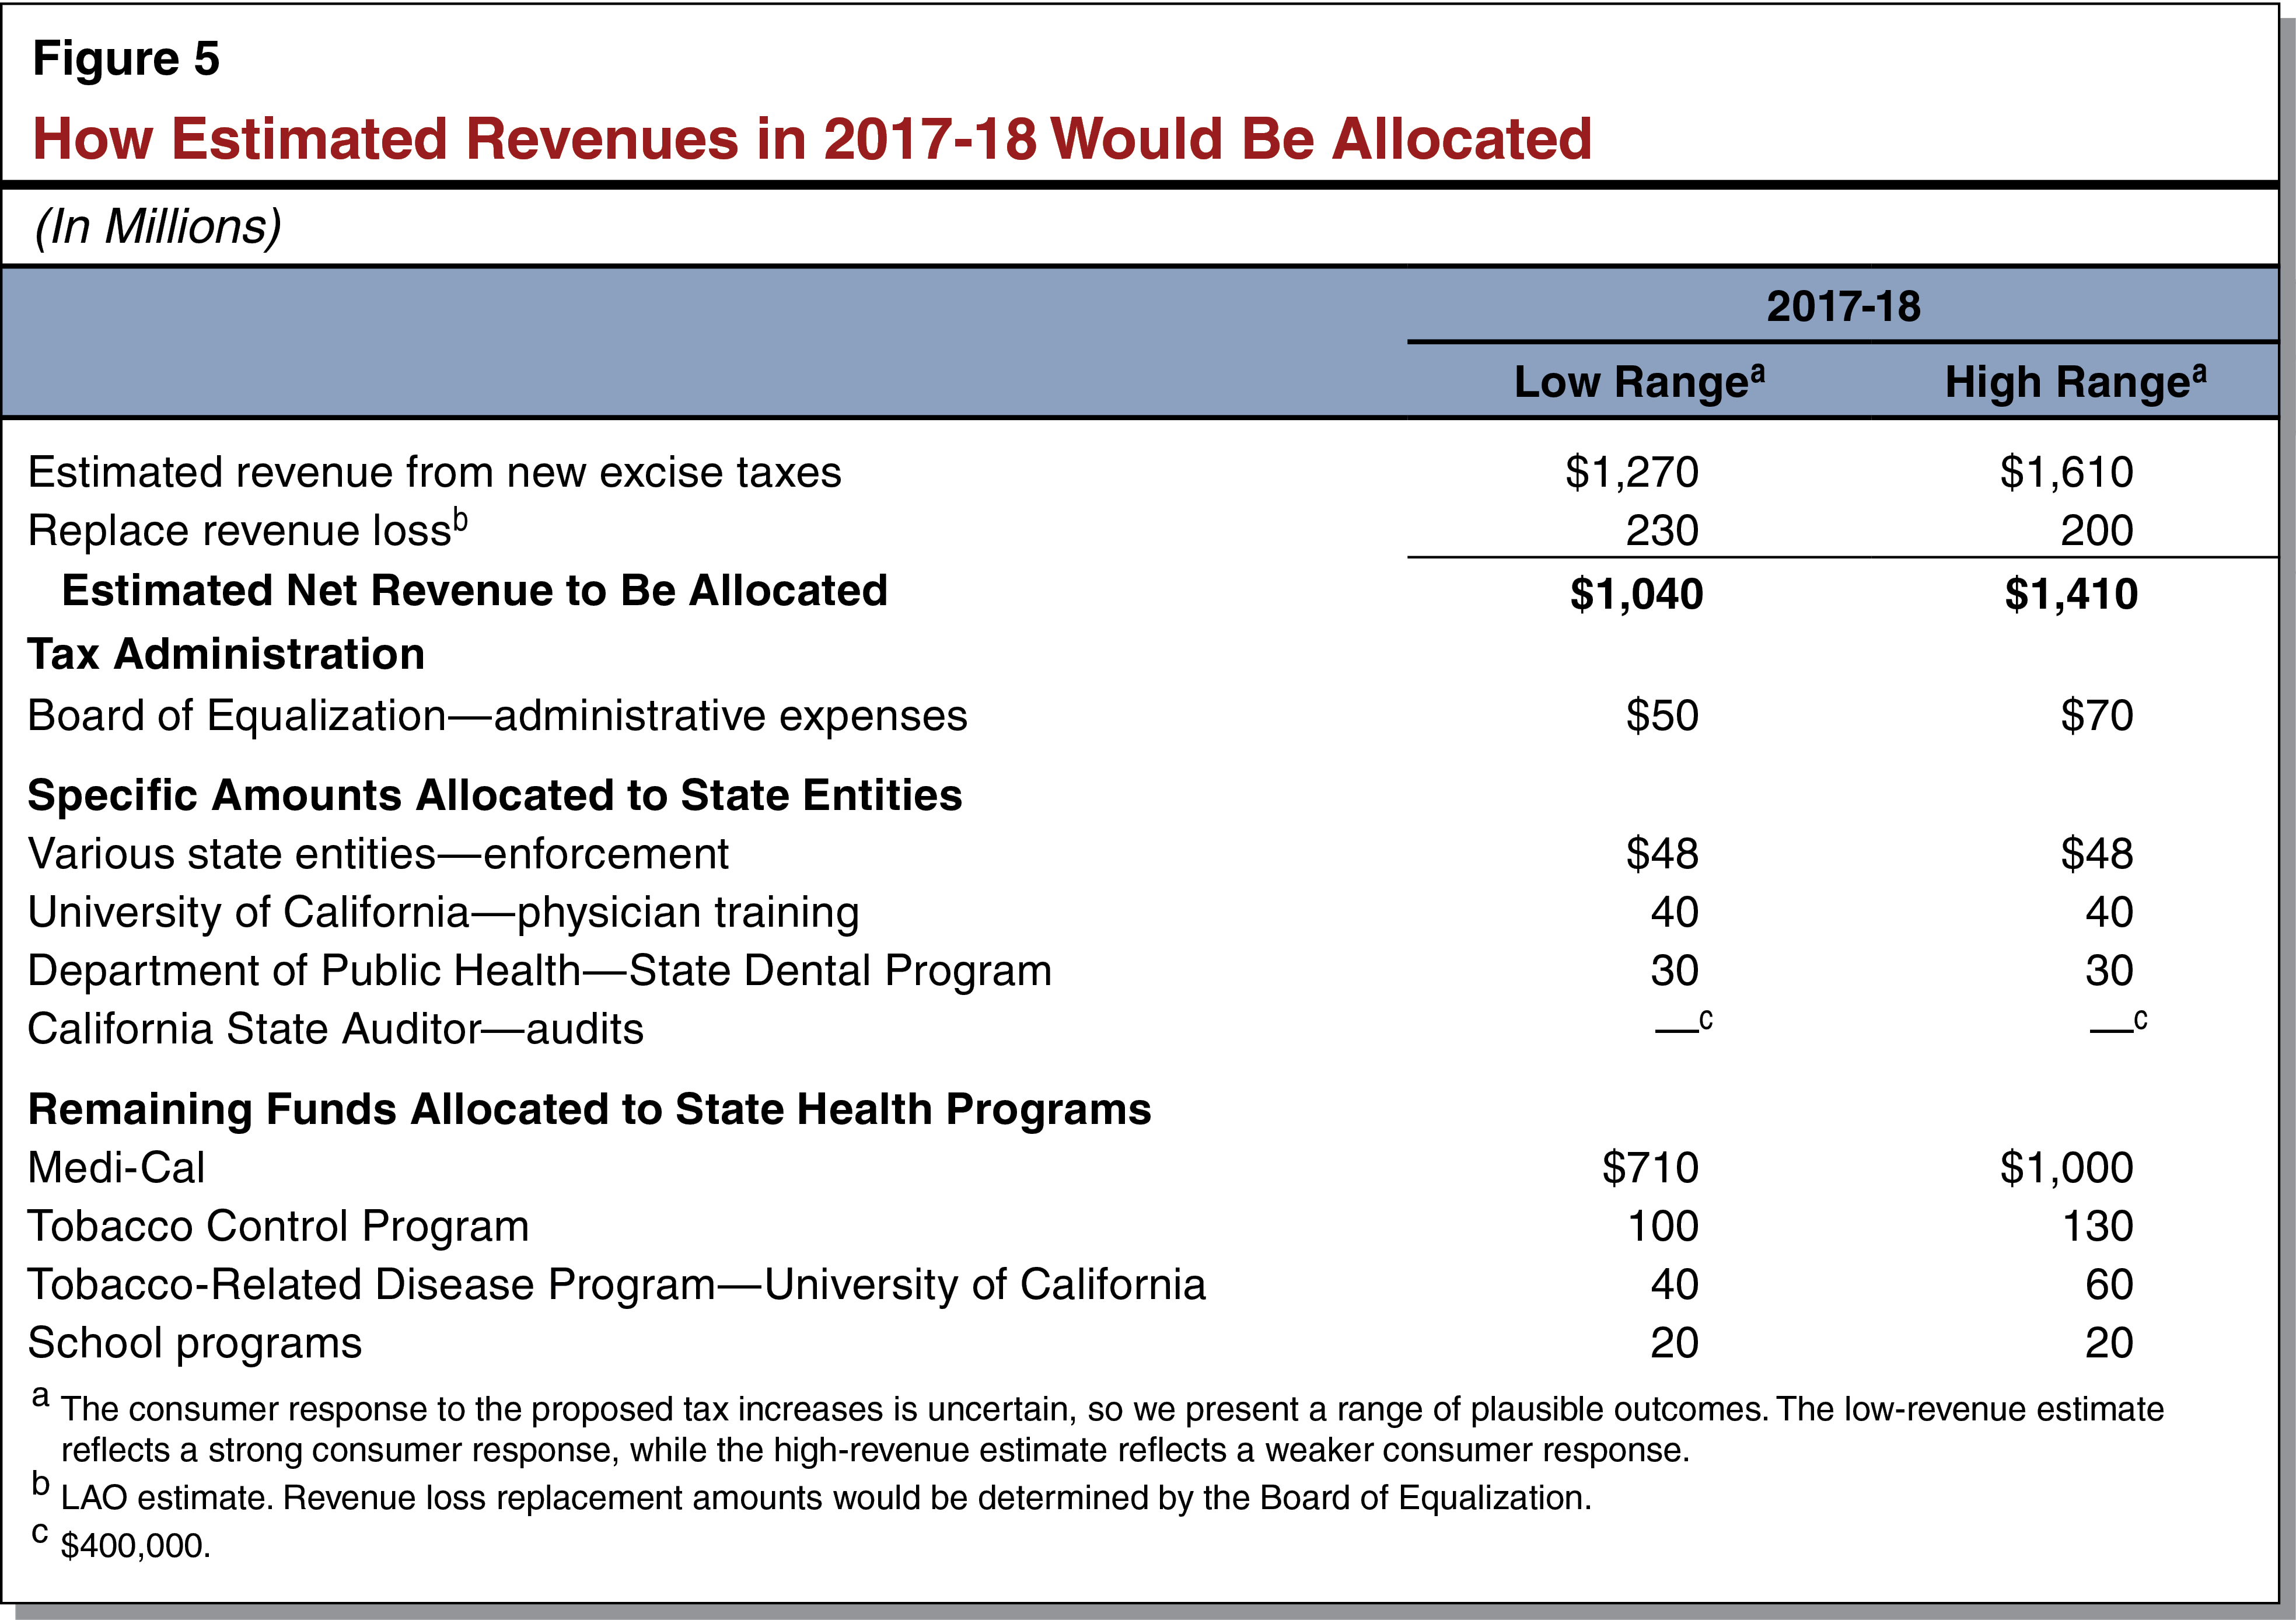 Figure 5 - How Estimated Revenues in 2017-18 Would Be Allocated